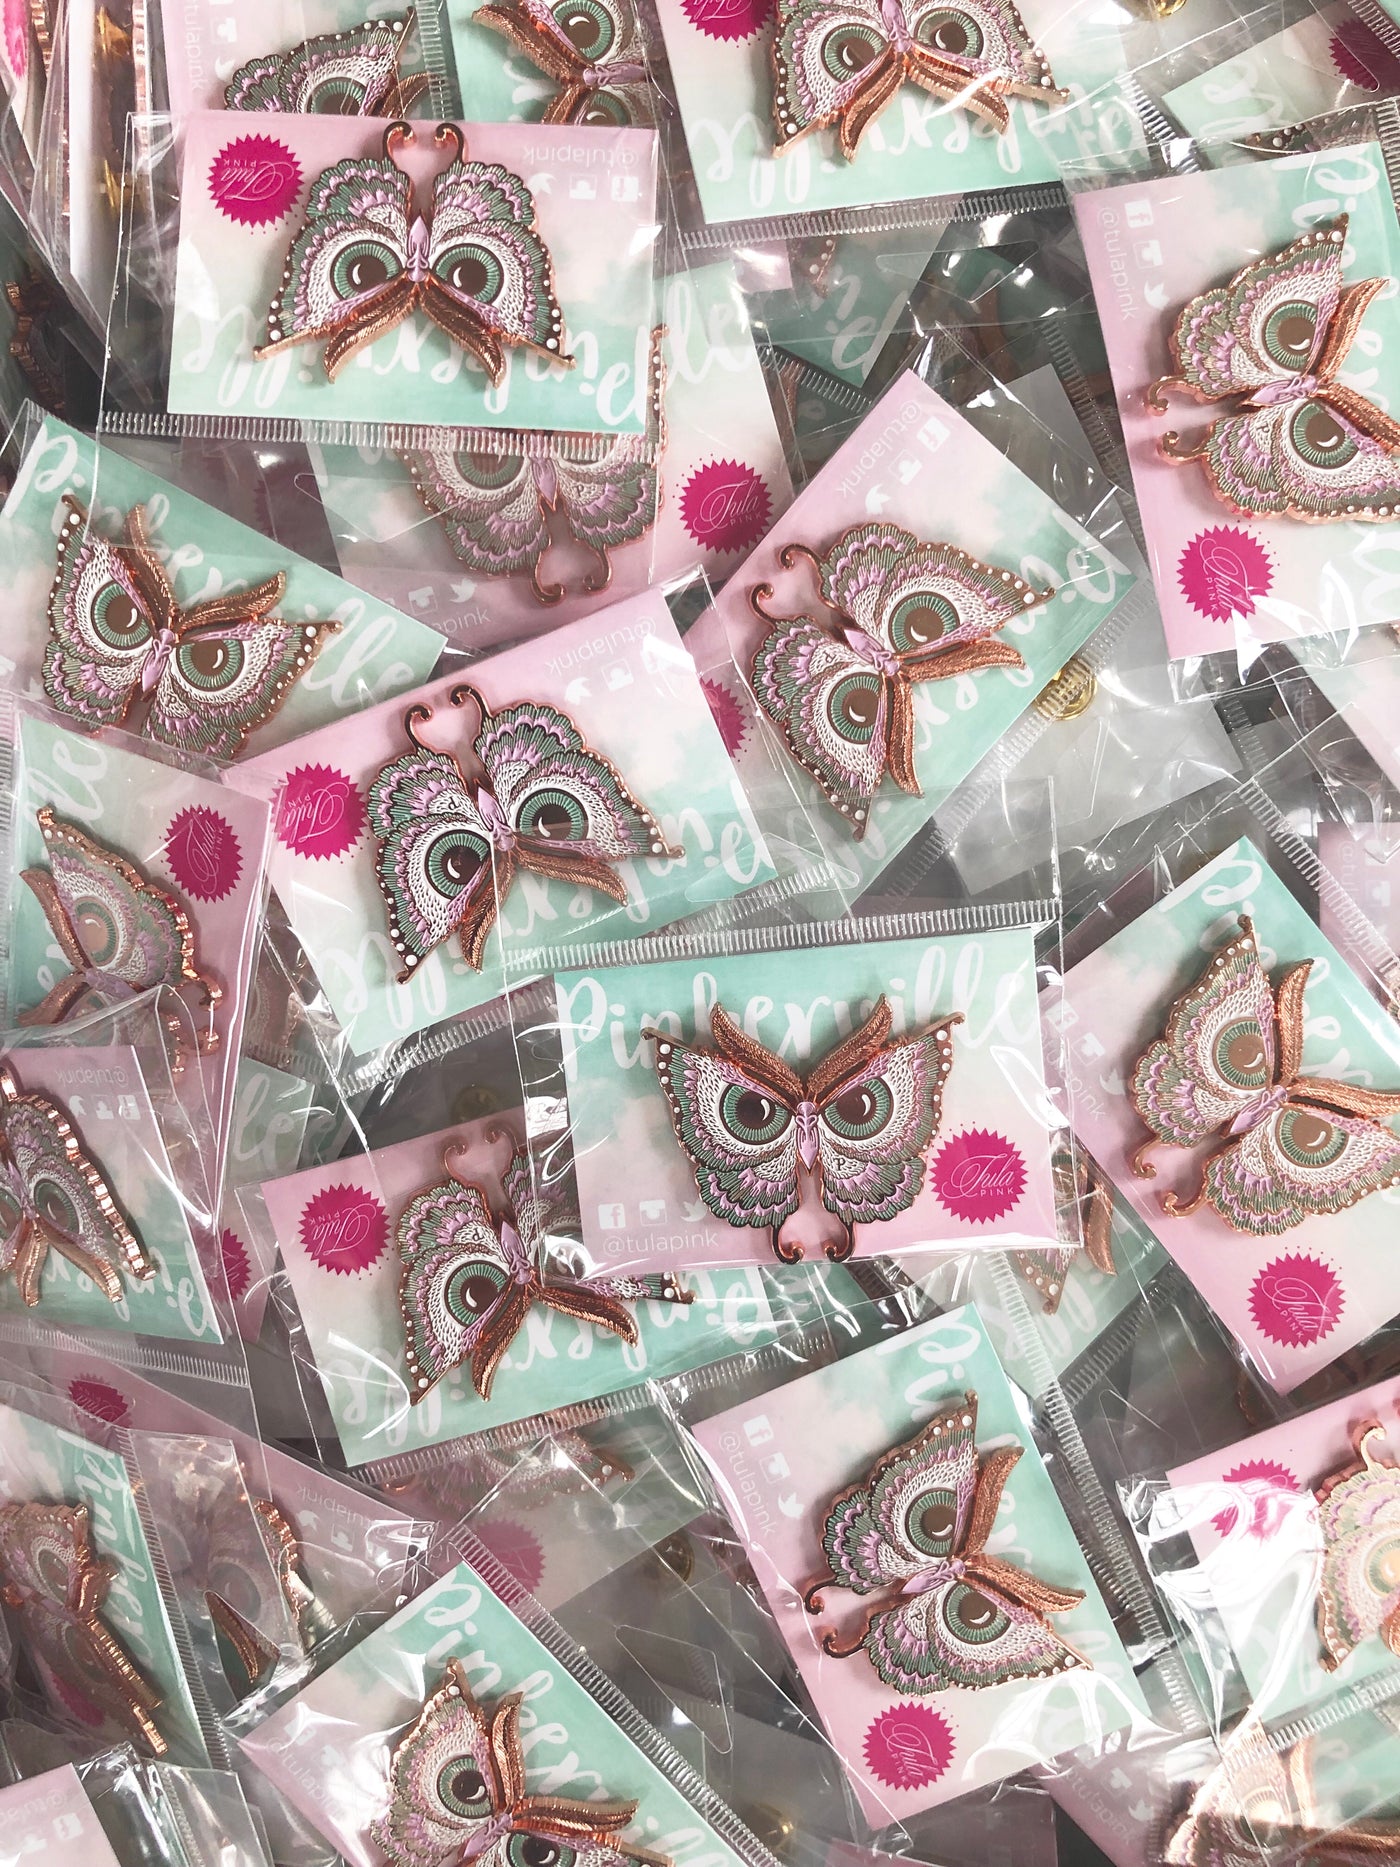 Pinkerville Rose Gold “Enlightenment Owl” Pin